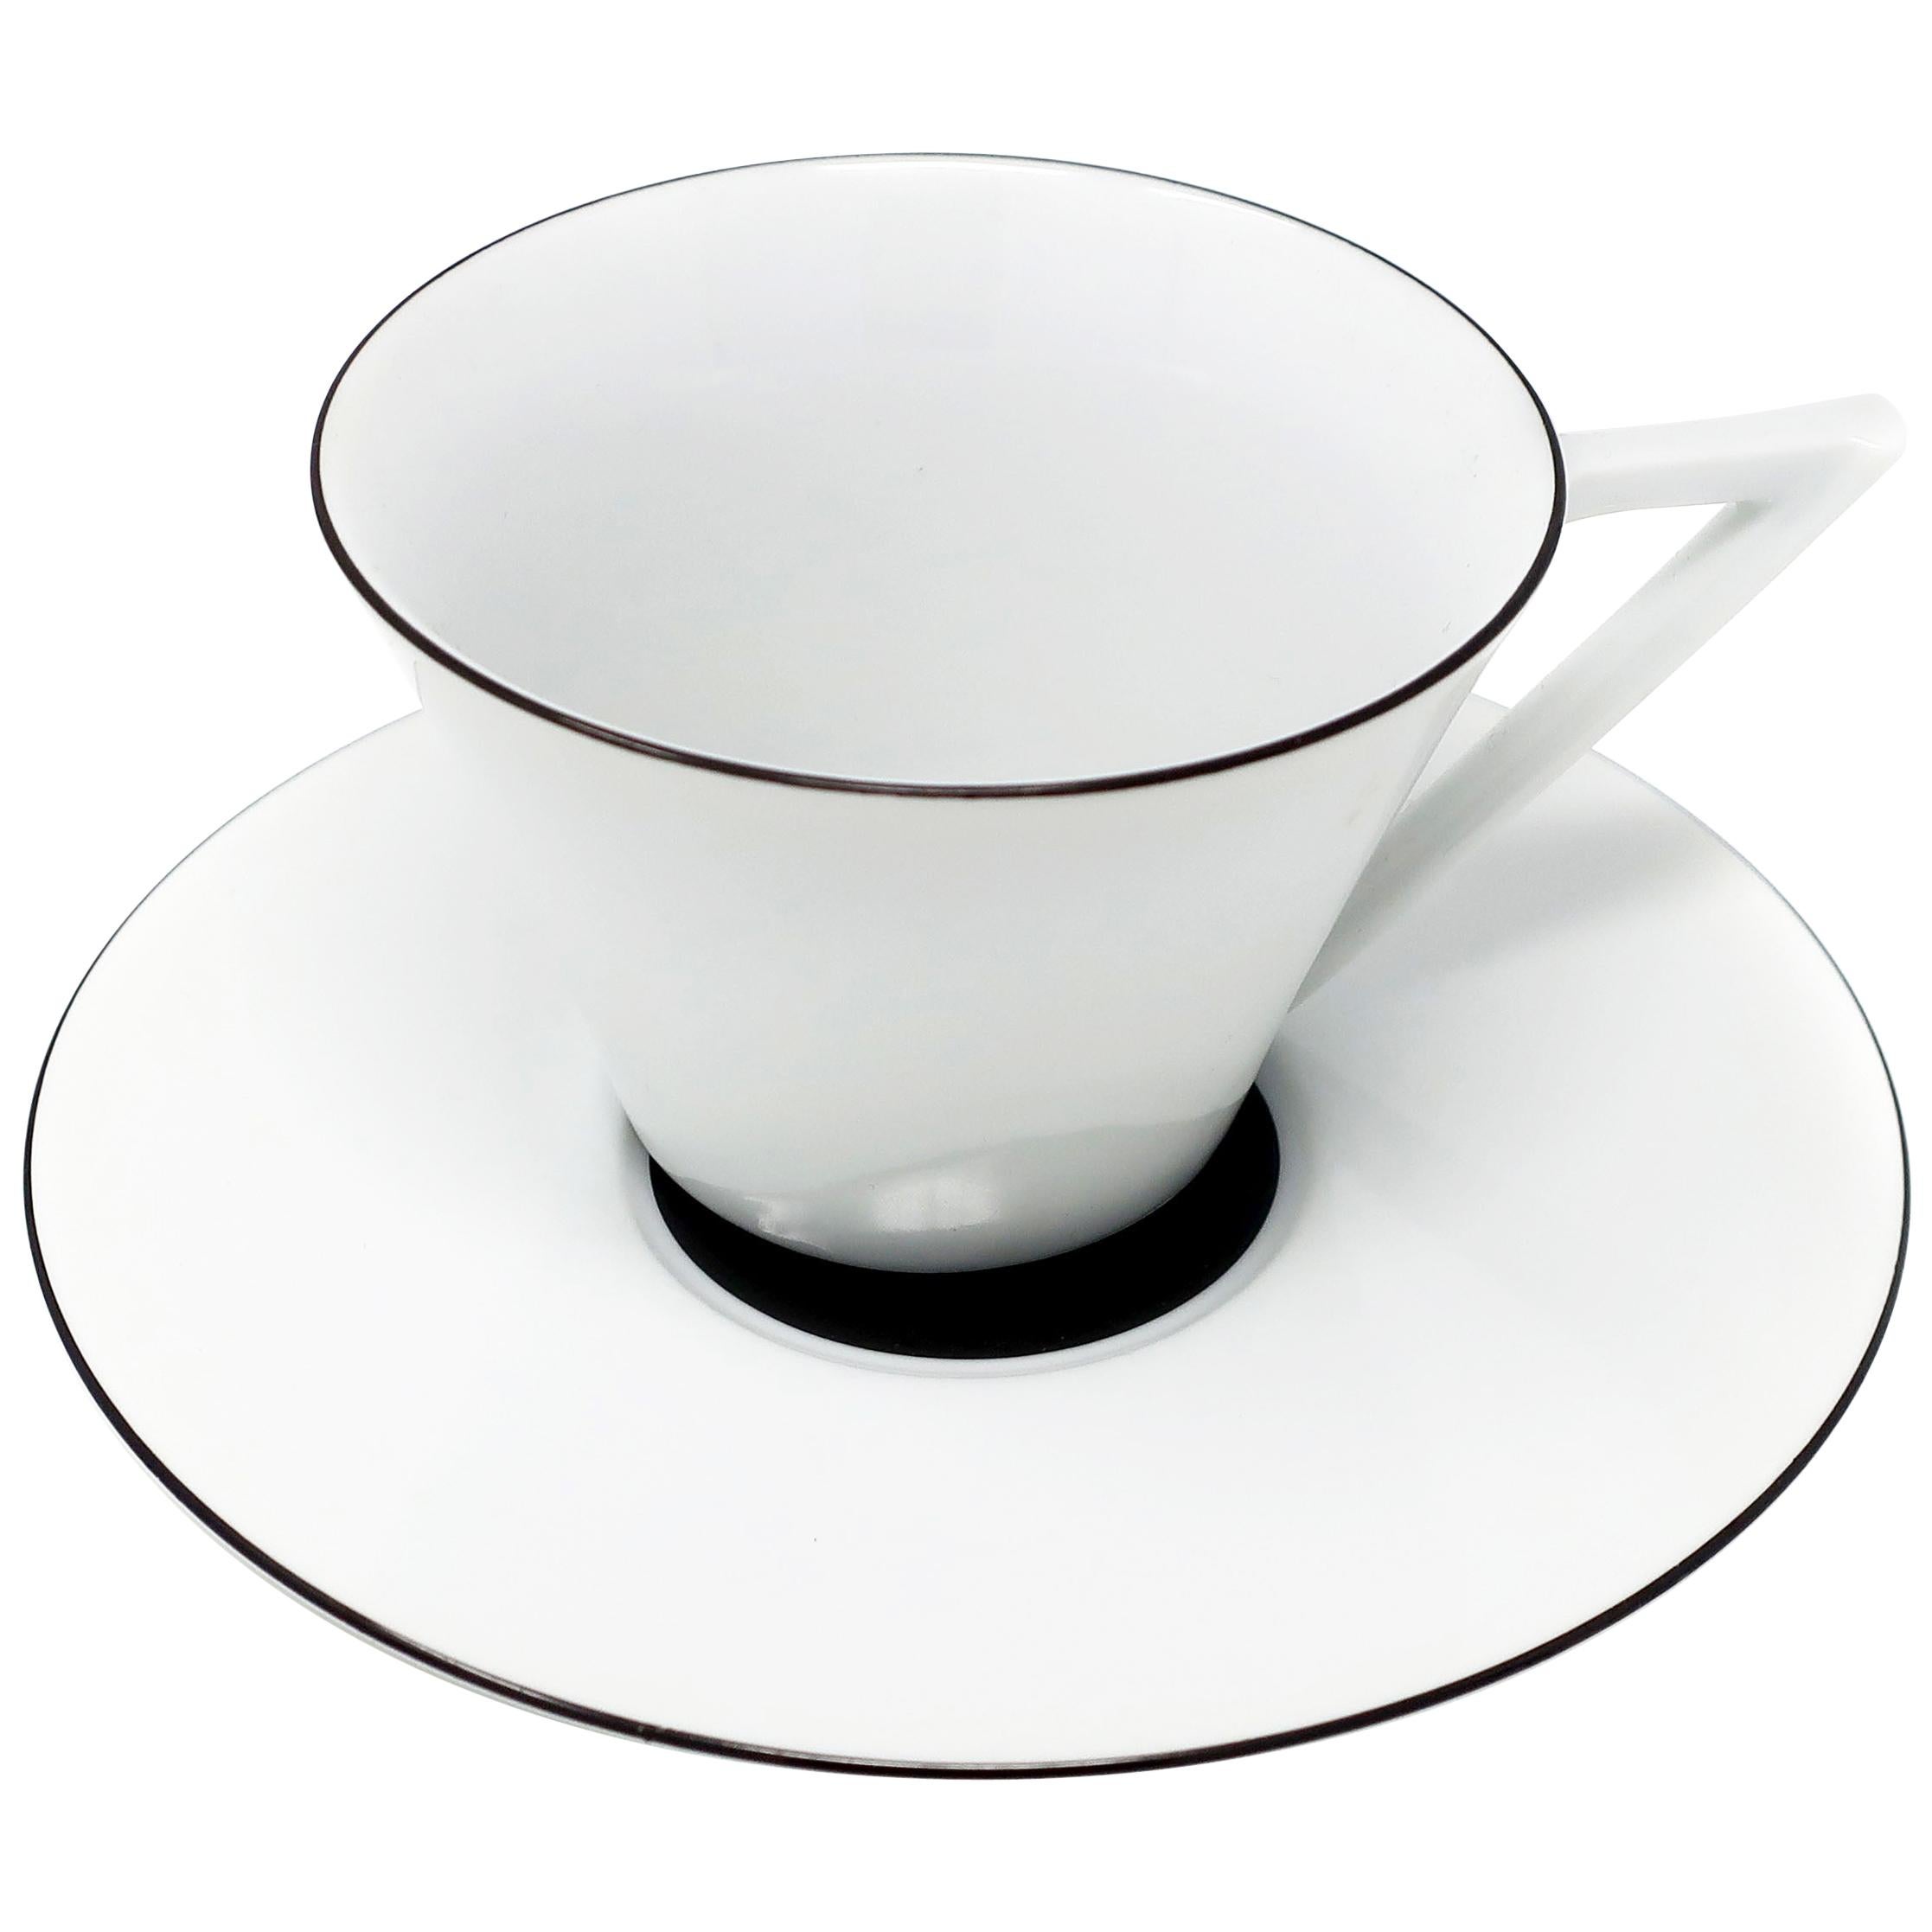 Andree Putman for Sasaki Cups and Saucers